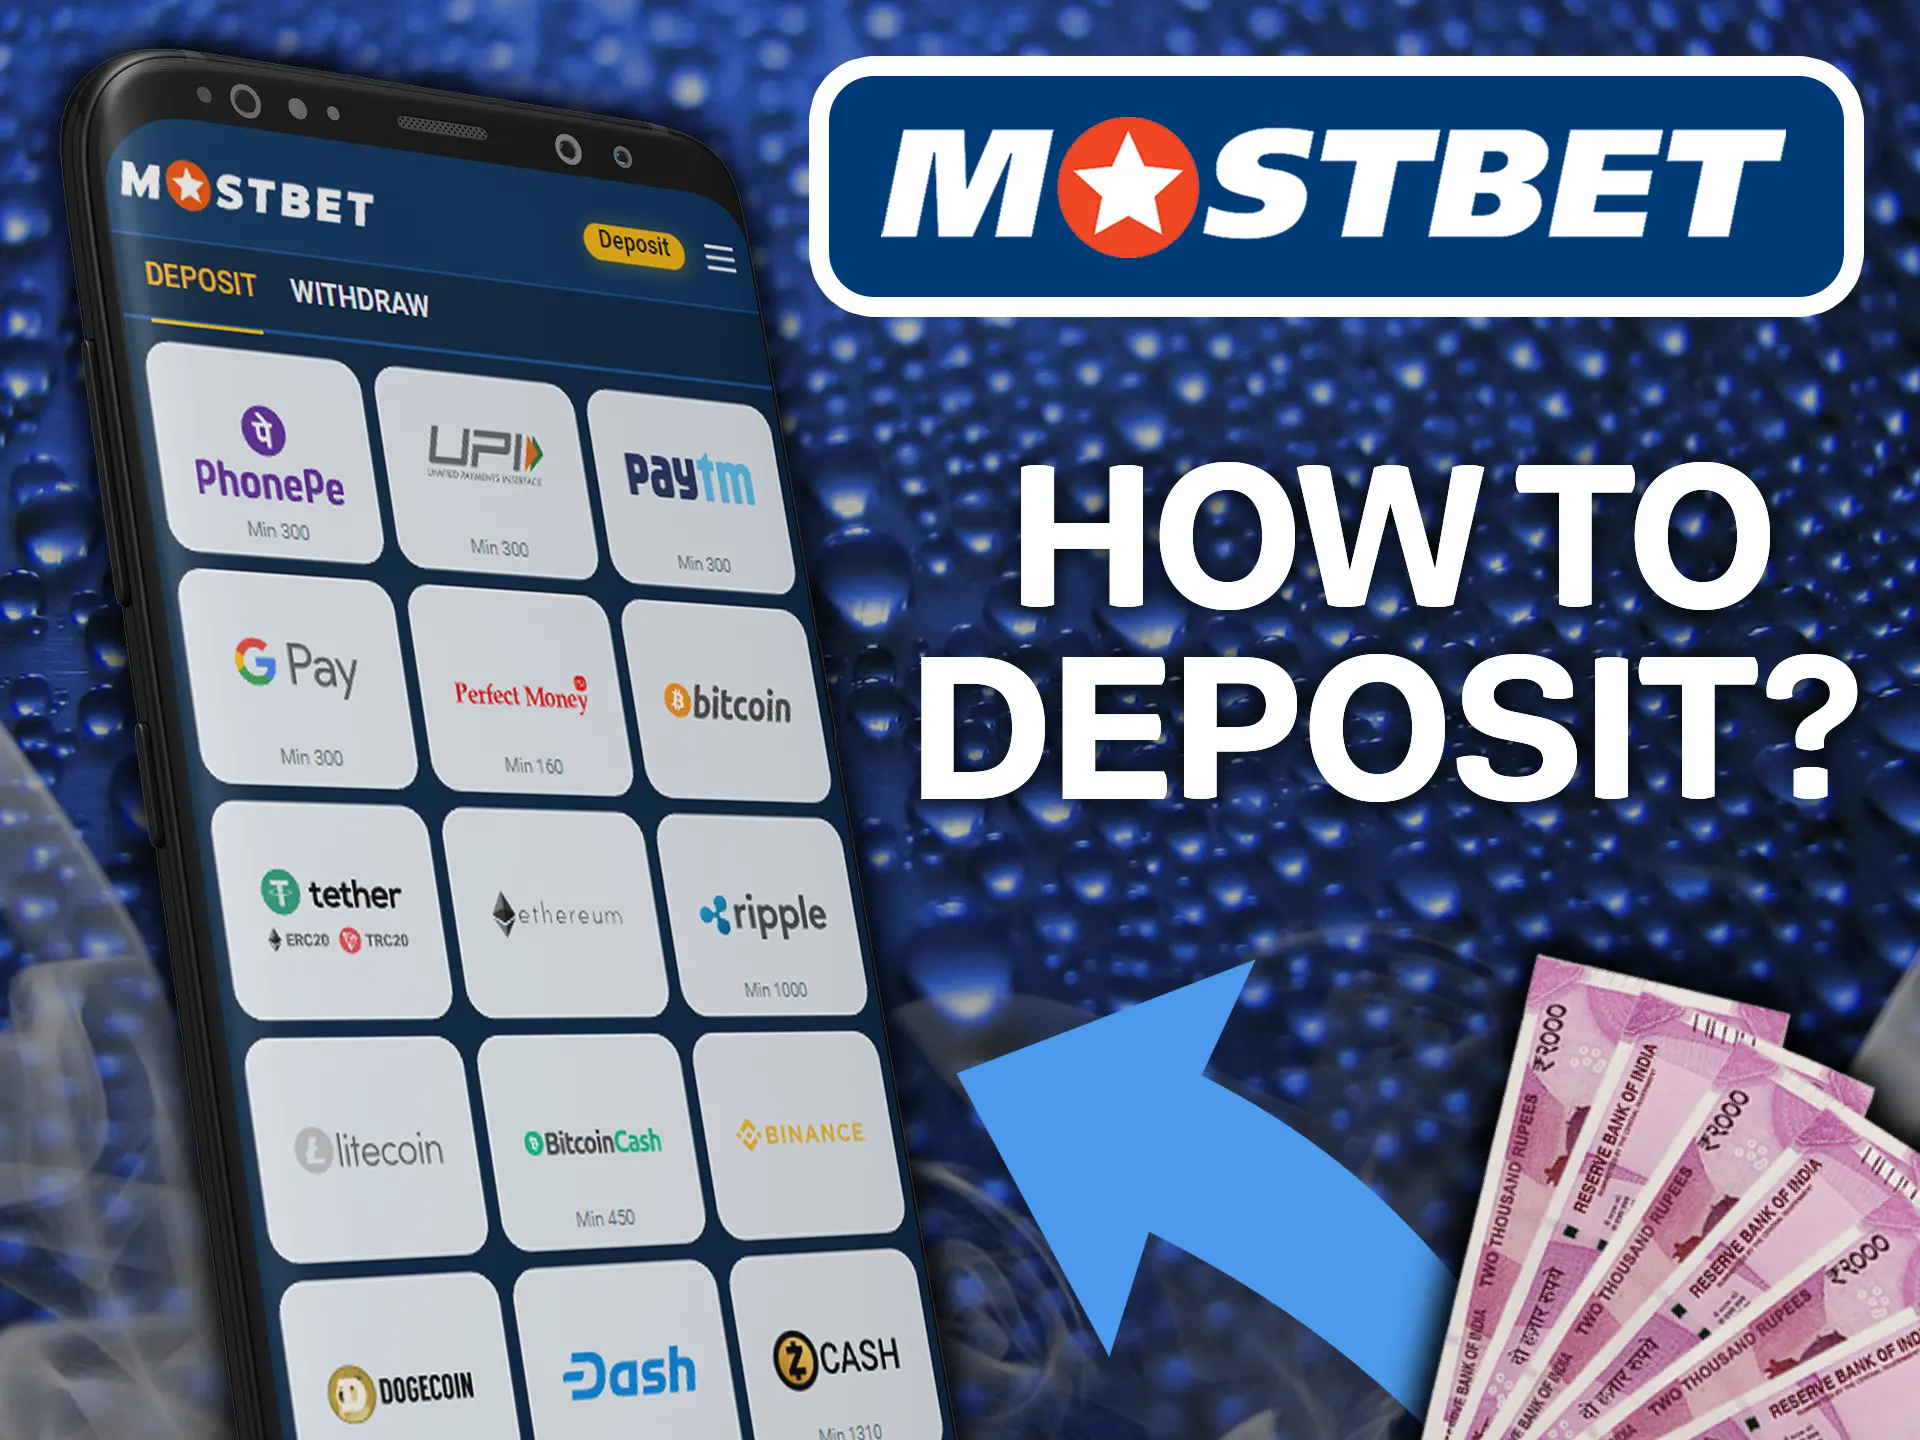 Choose the right way to deposit and make a deposit faster with Mostbet app.